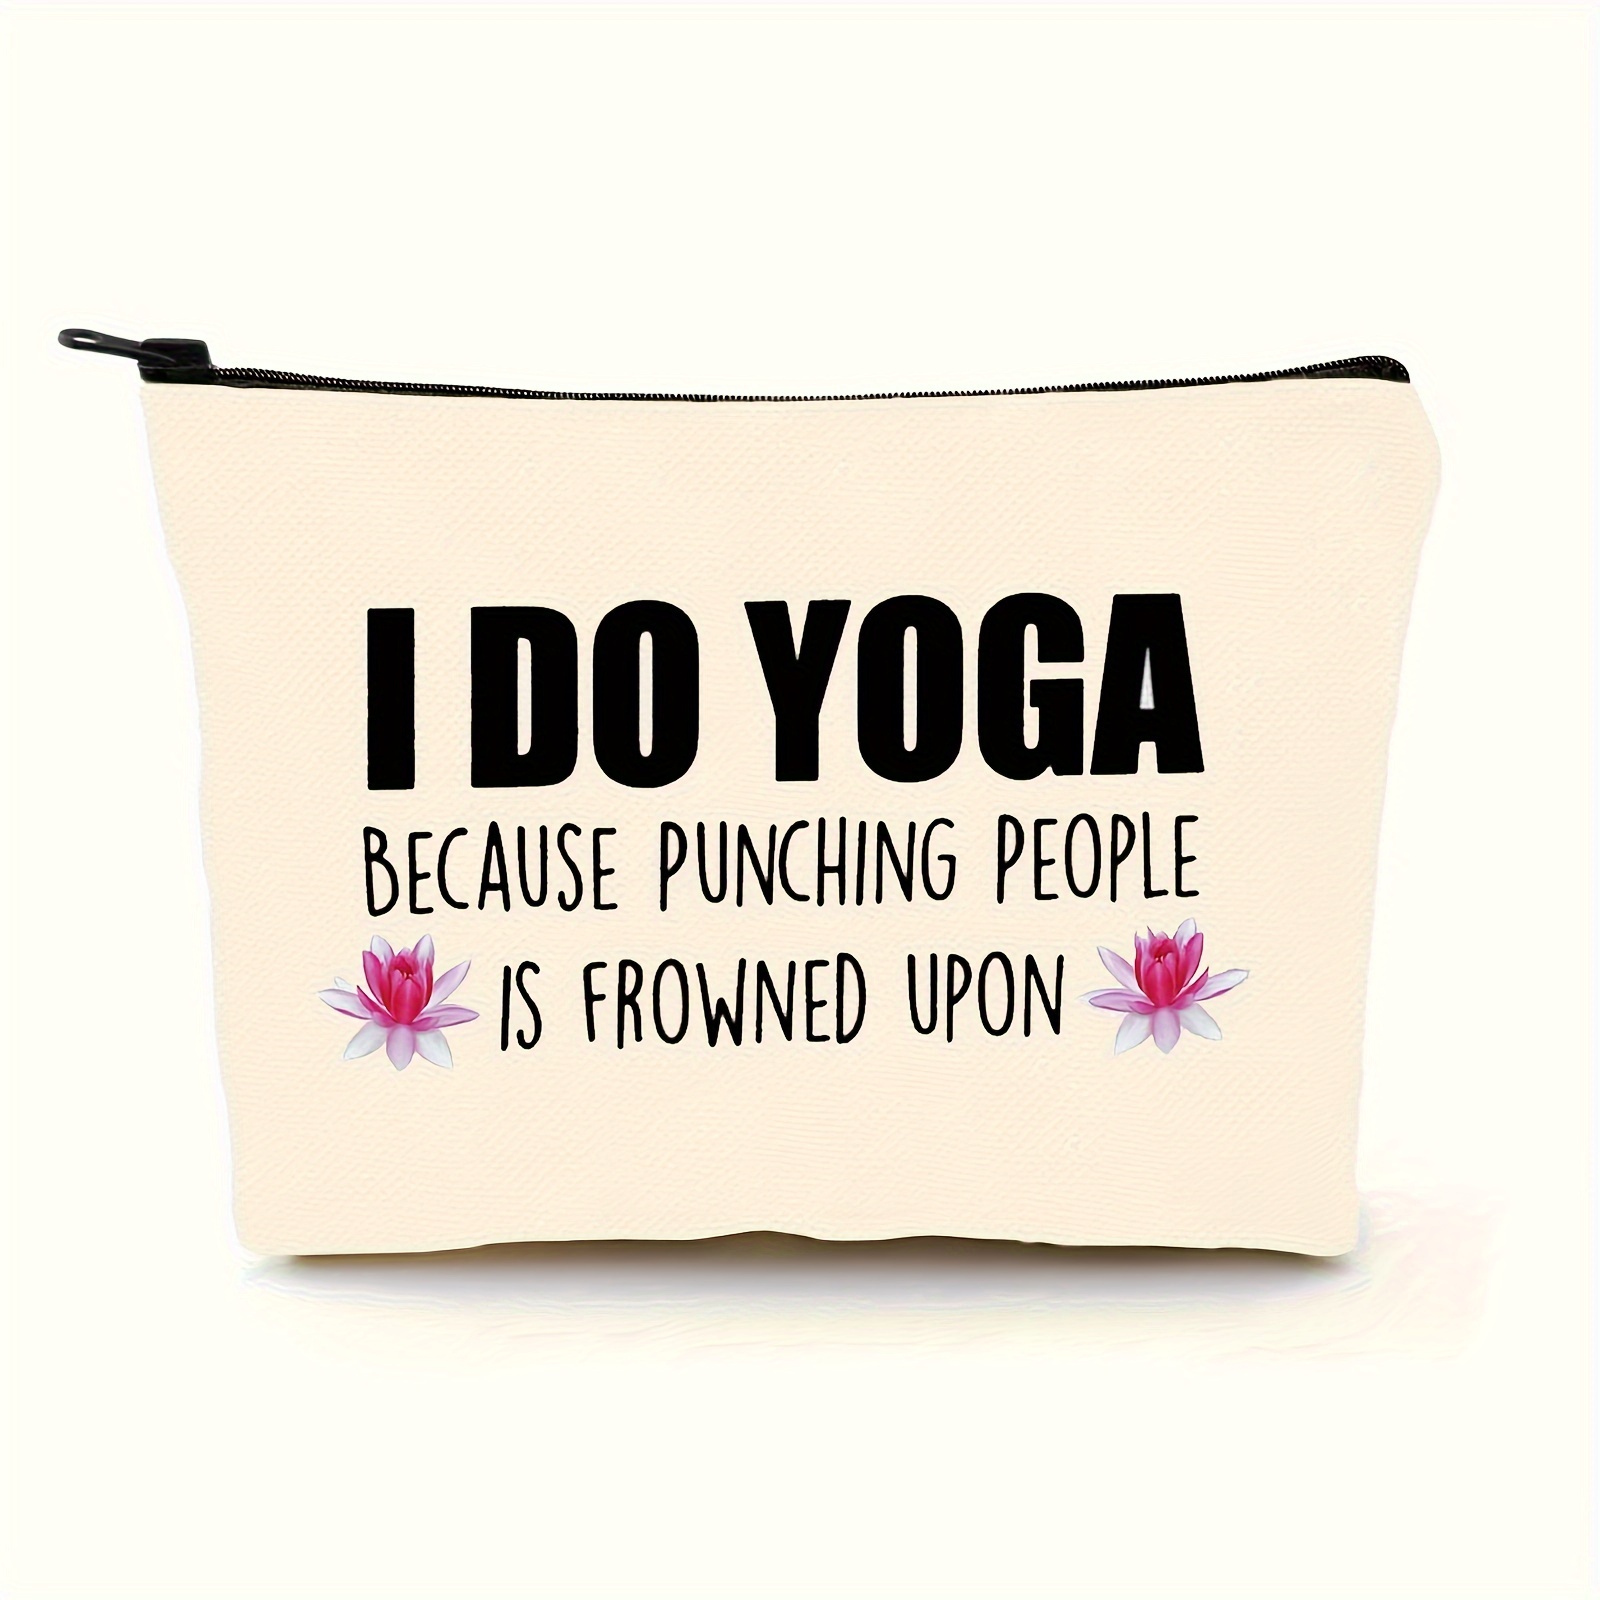 I Do Yoga Because Punching People is Frowned Upon Tote Bag Shopping Bag  Gifts for Yoga Lovers Yoga Gift Shopping Bag Yoga -  Canada